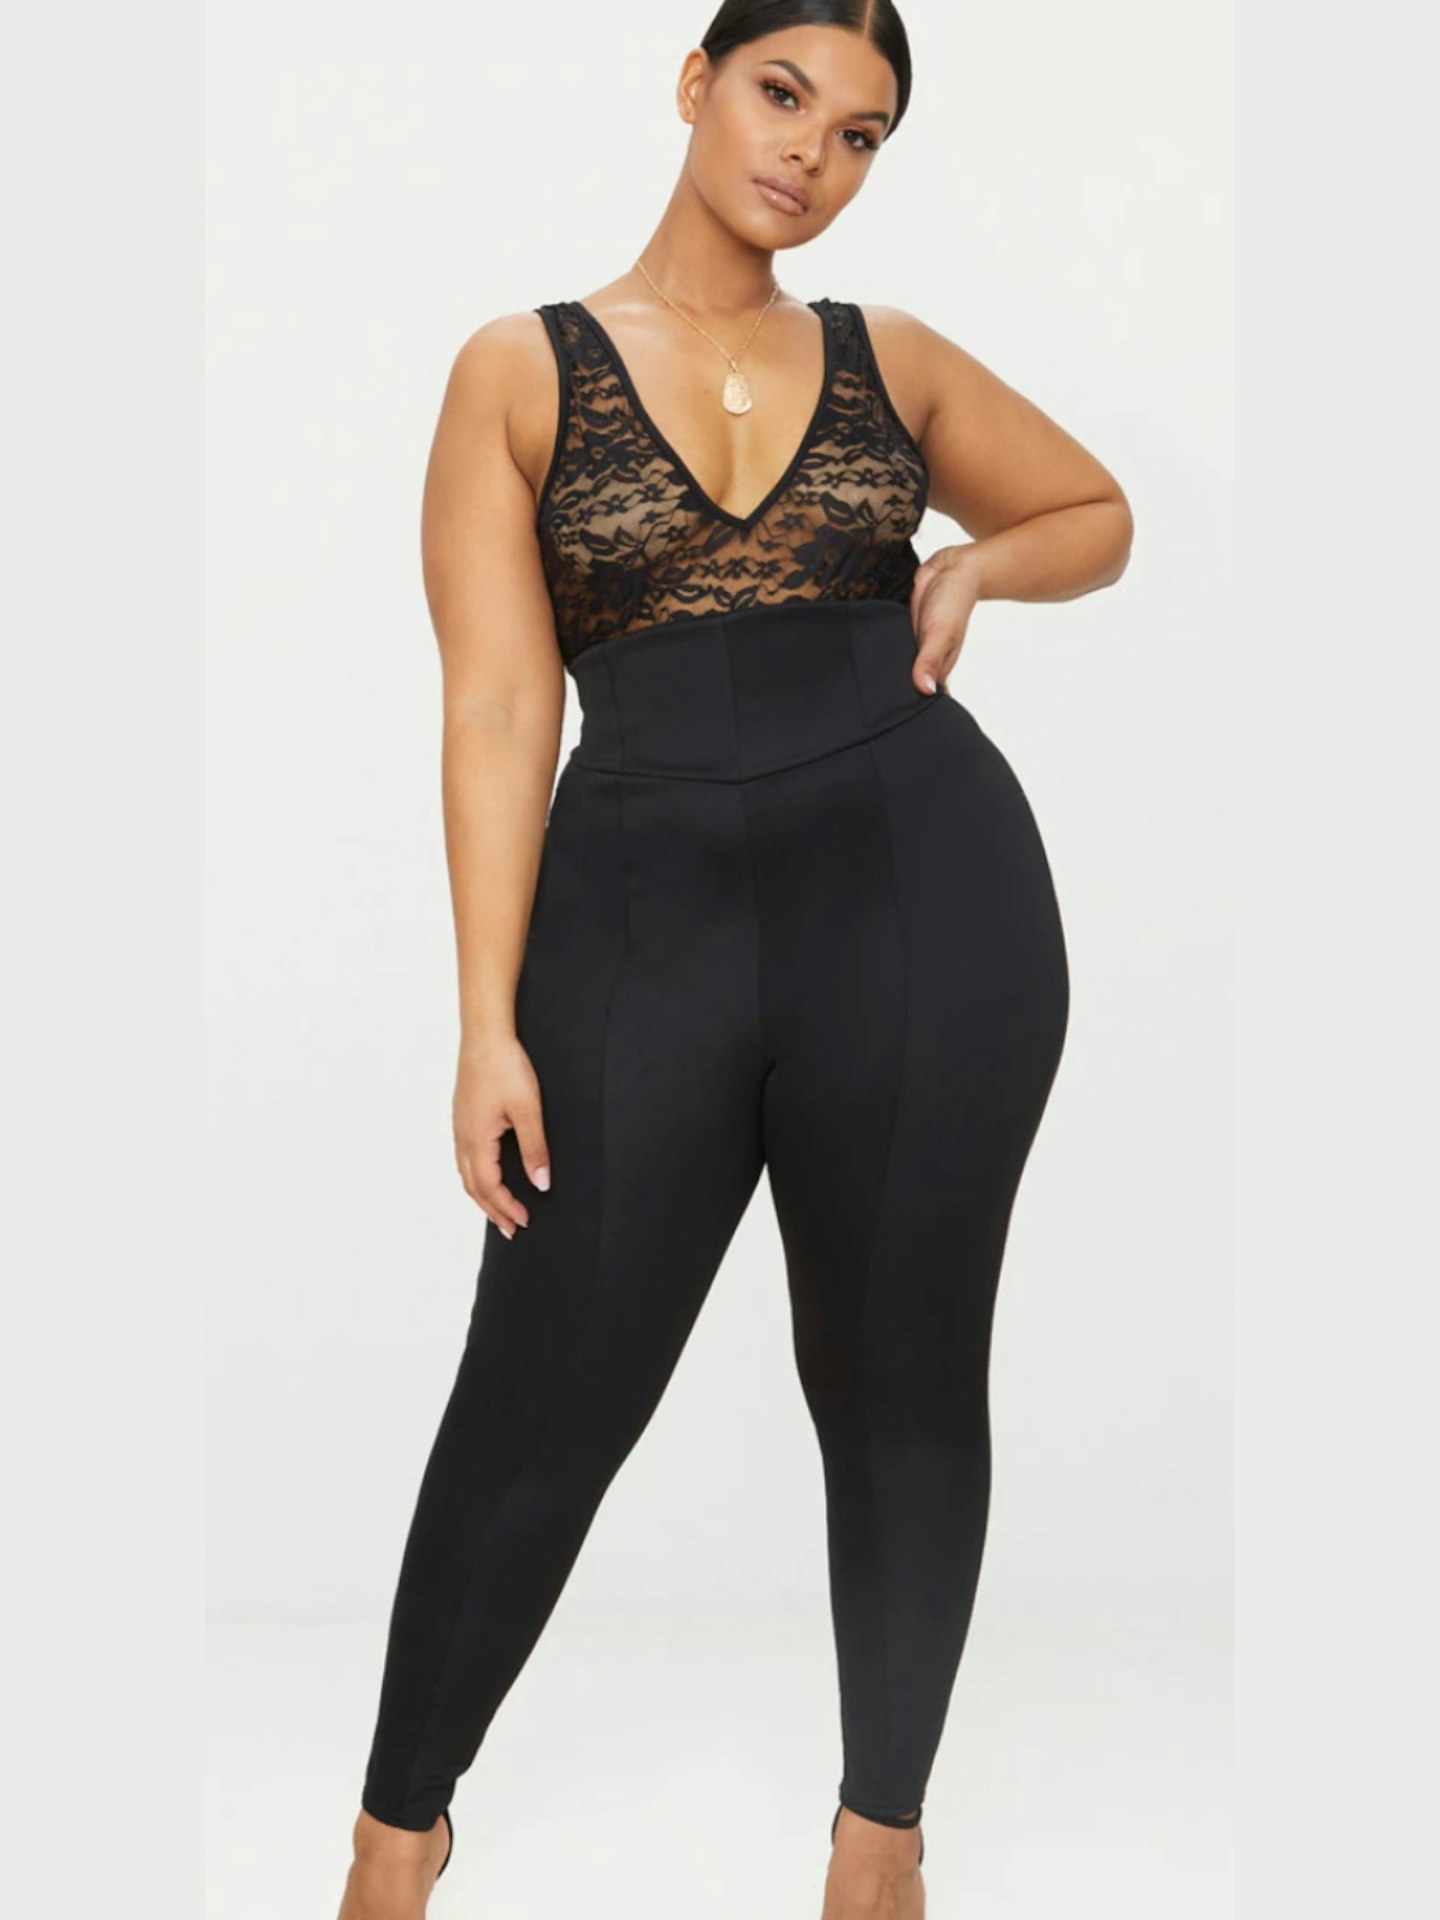 THE BEST LEGGINGS FOR PLUS SIZE WOMEN THAT STAY UP